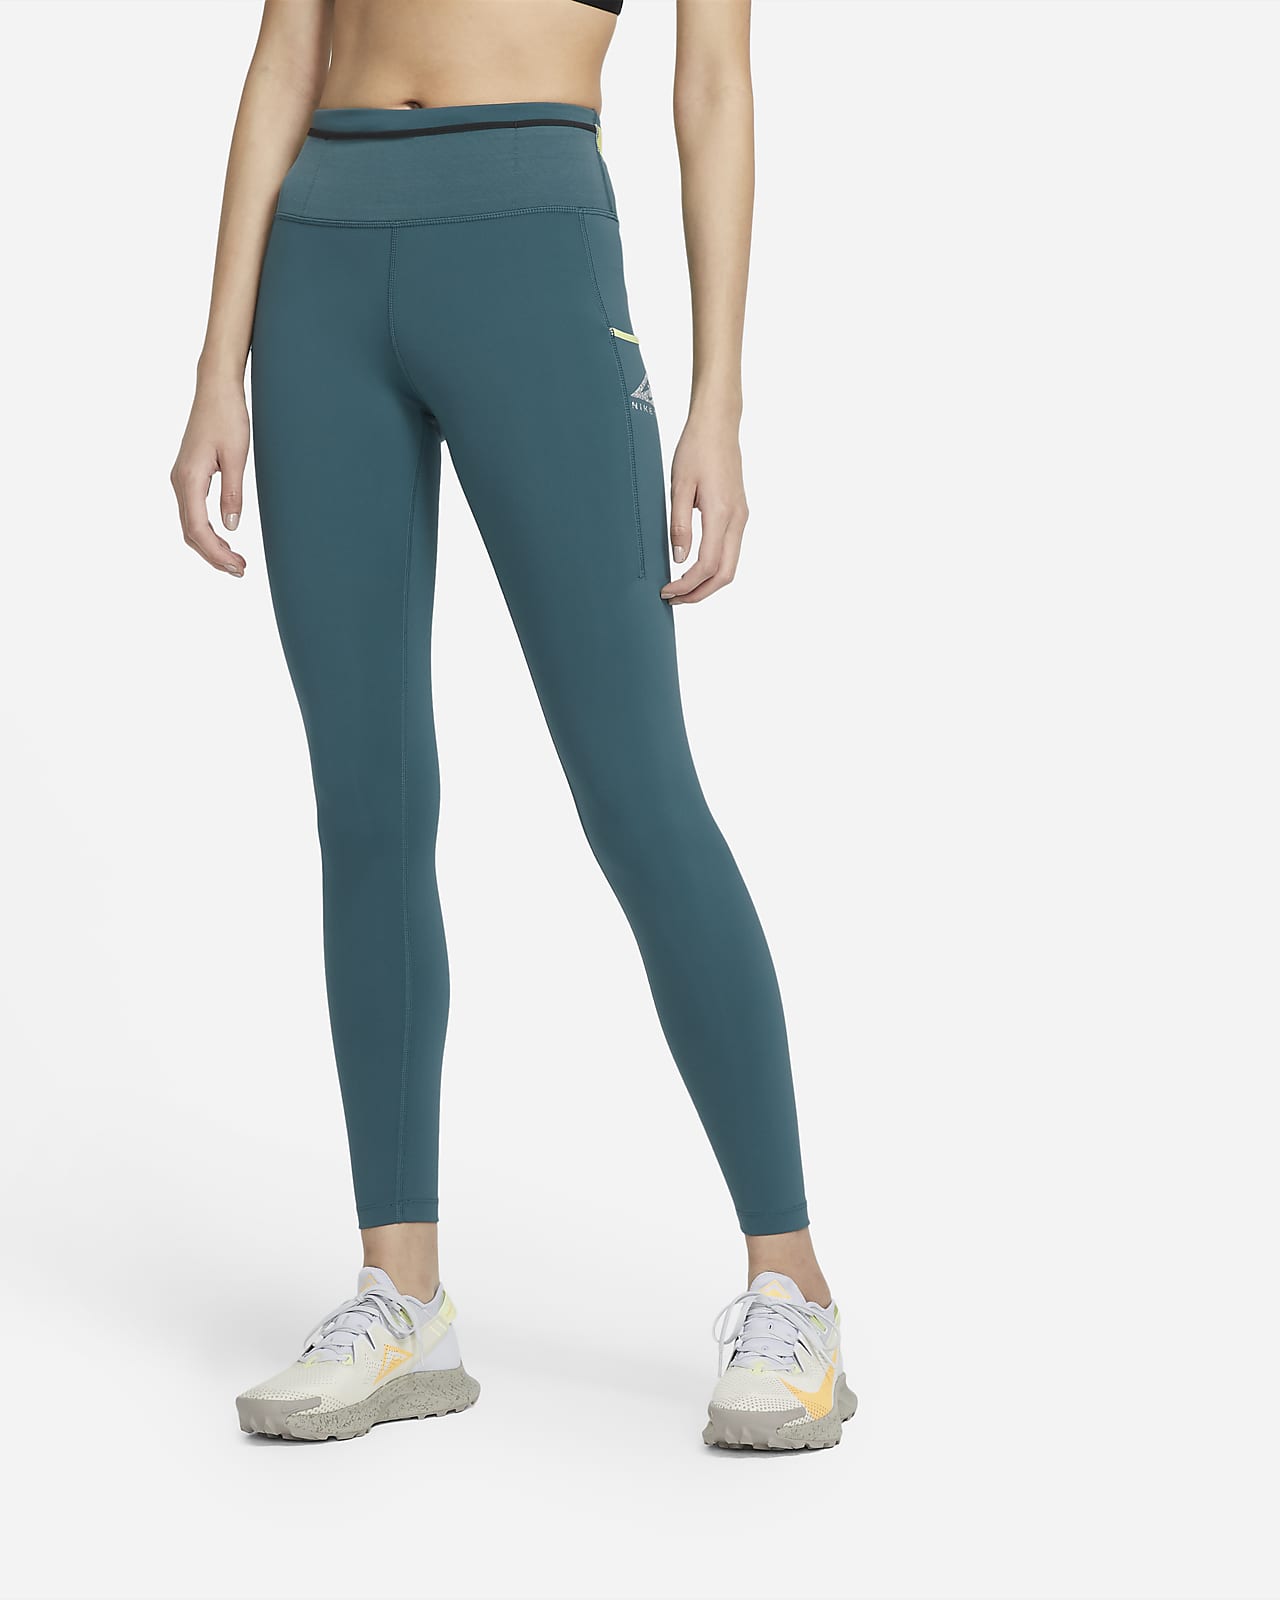 nike leggings with cell phone pocket